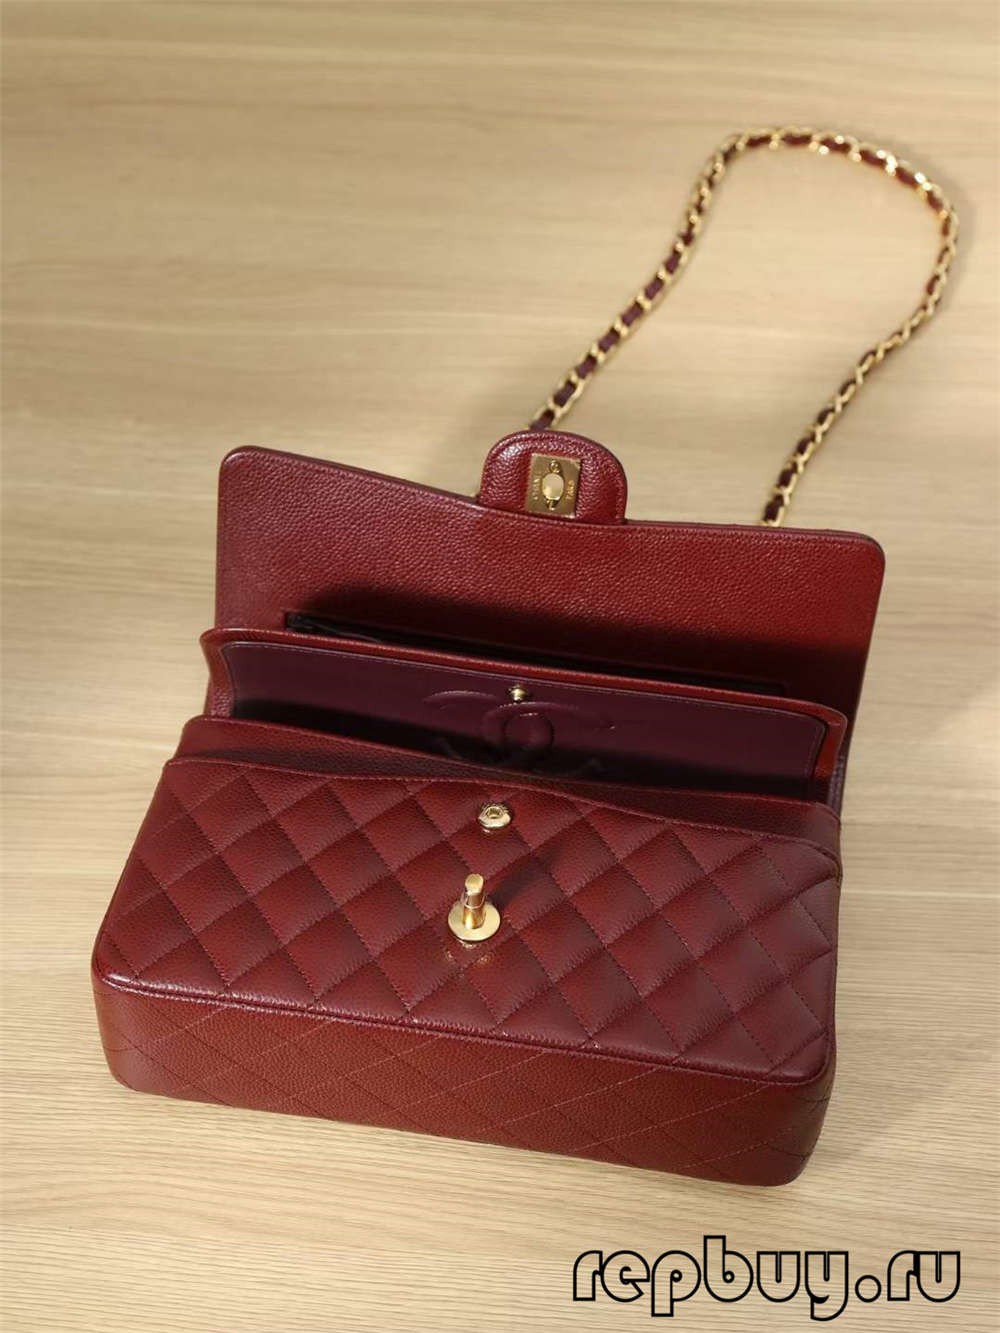 CHANEL Classic Flap top replica bags red 25cm inside pocket details (2022 Edition)-Best Quality Fake designer Bag Review, Replica designer bag ru